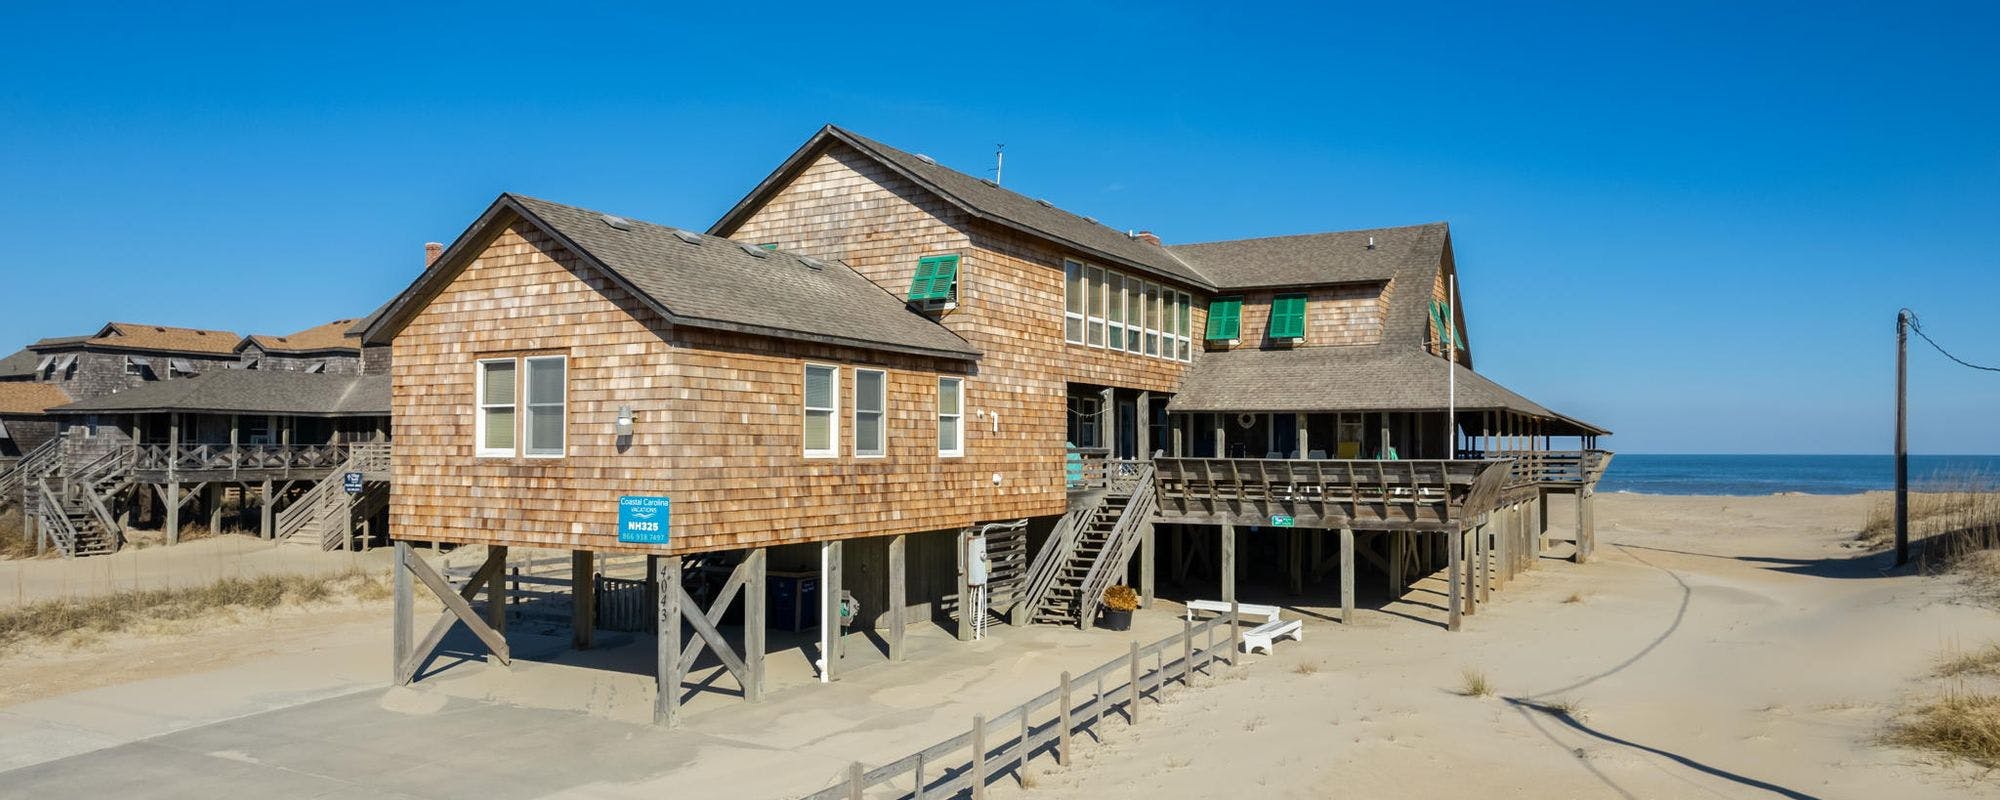 Classic oceanfront beach house in the Outer Banks